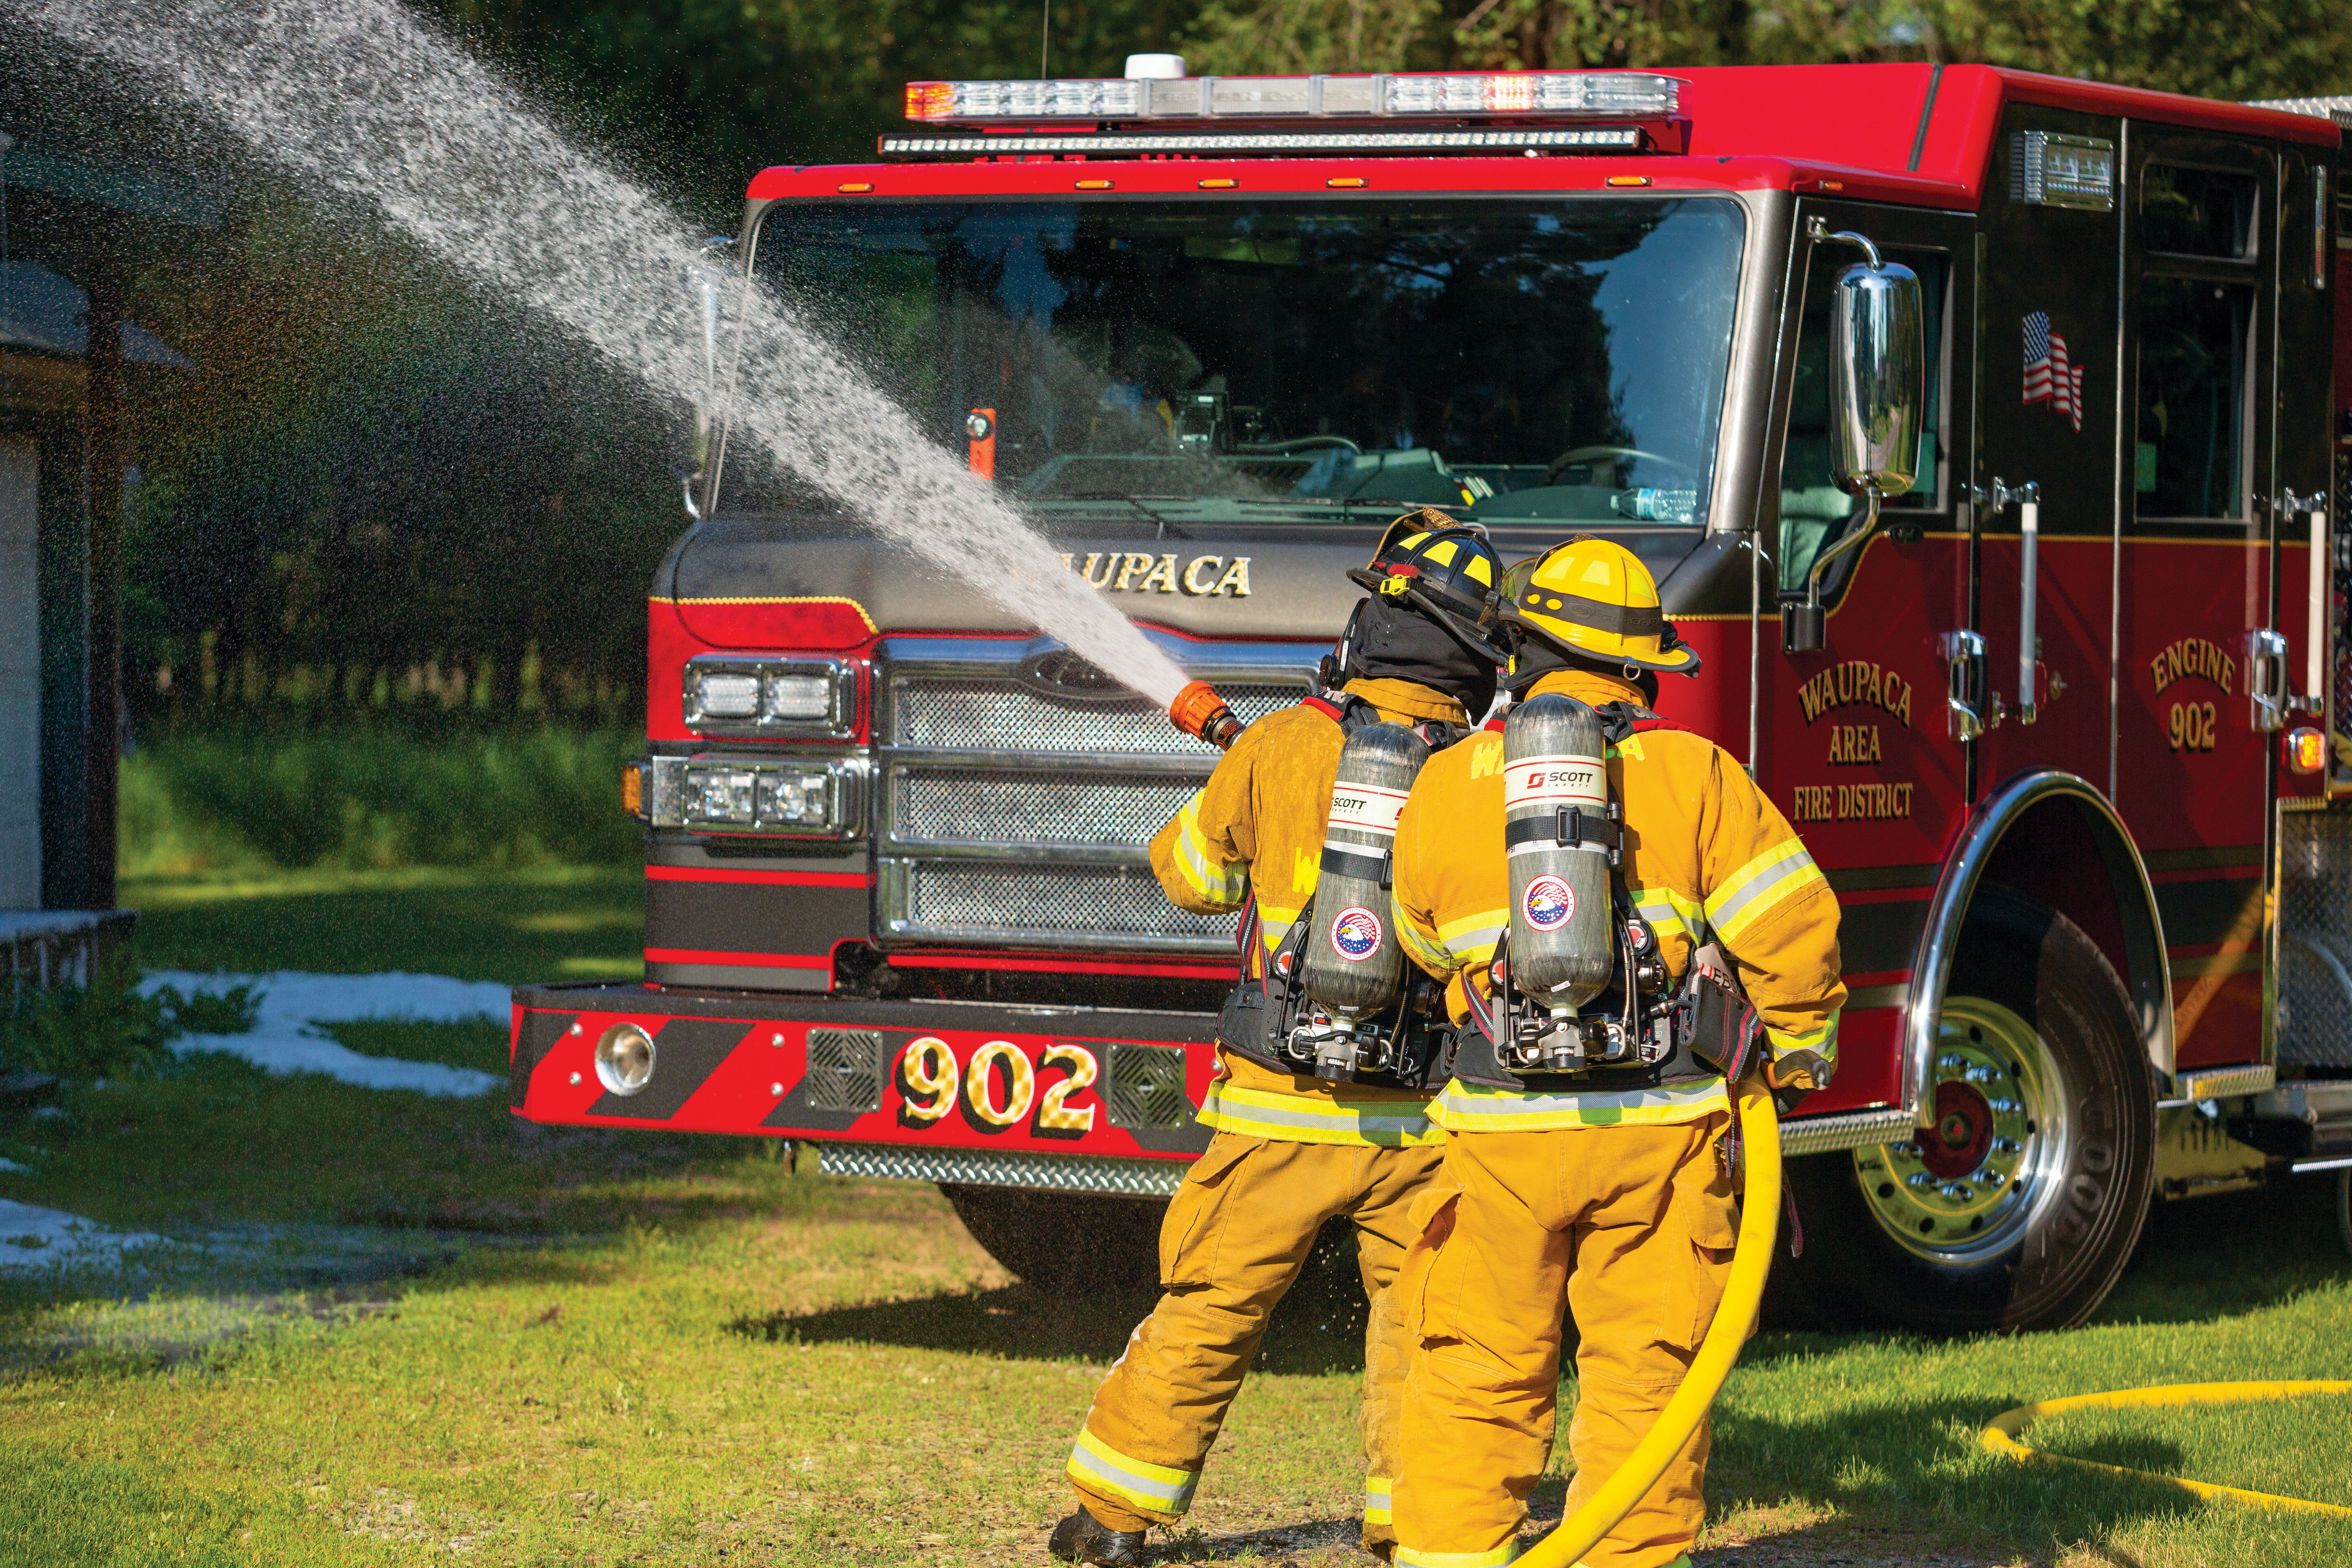 Impel PUC Pumper Fire Truck As Firefighters Spray Water